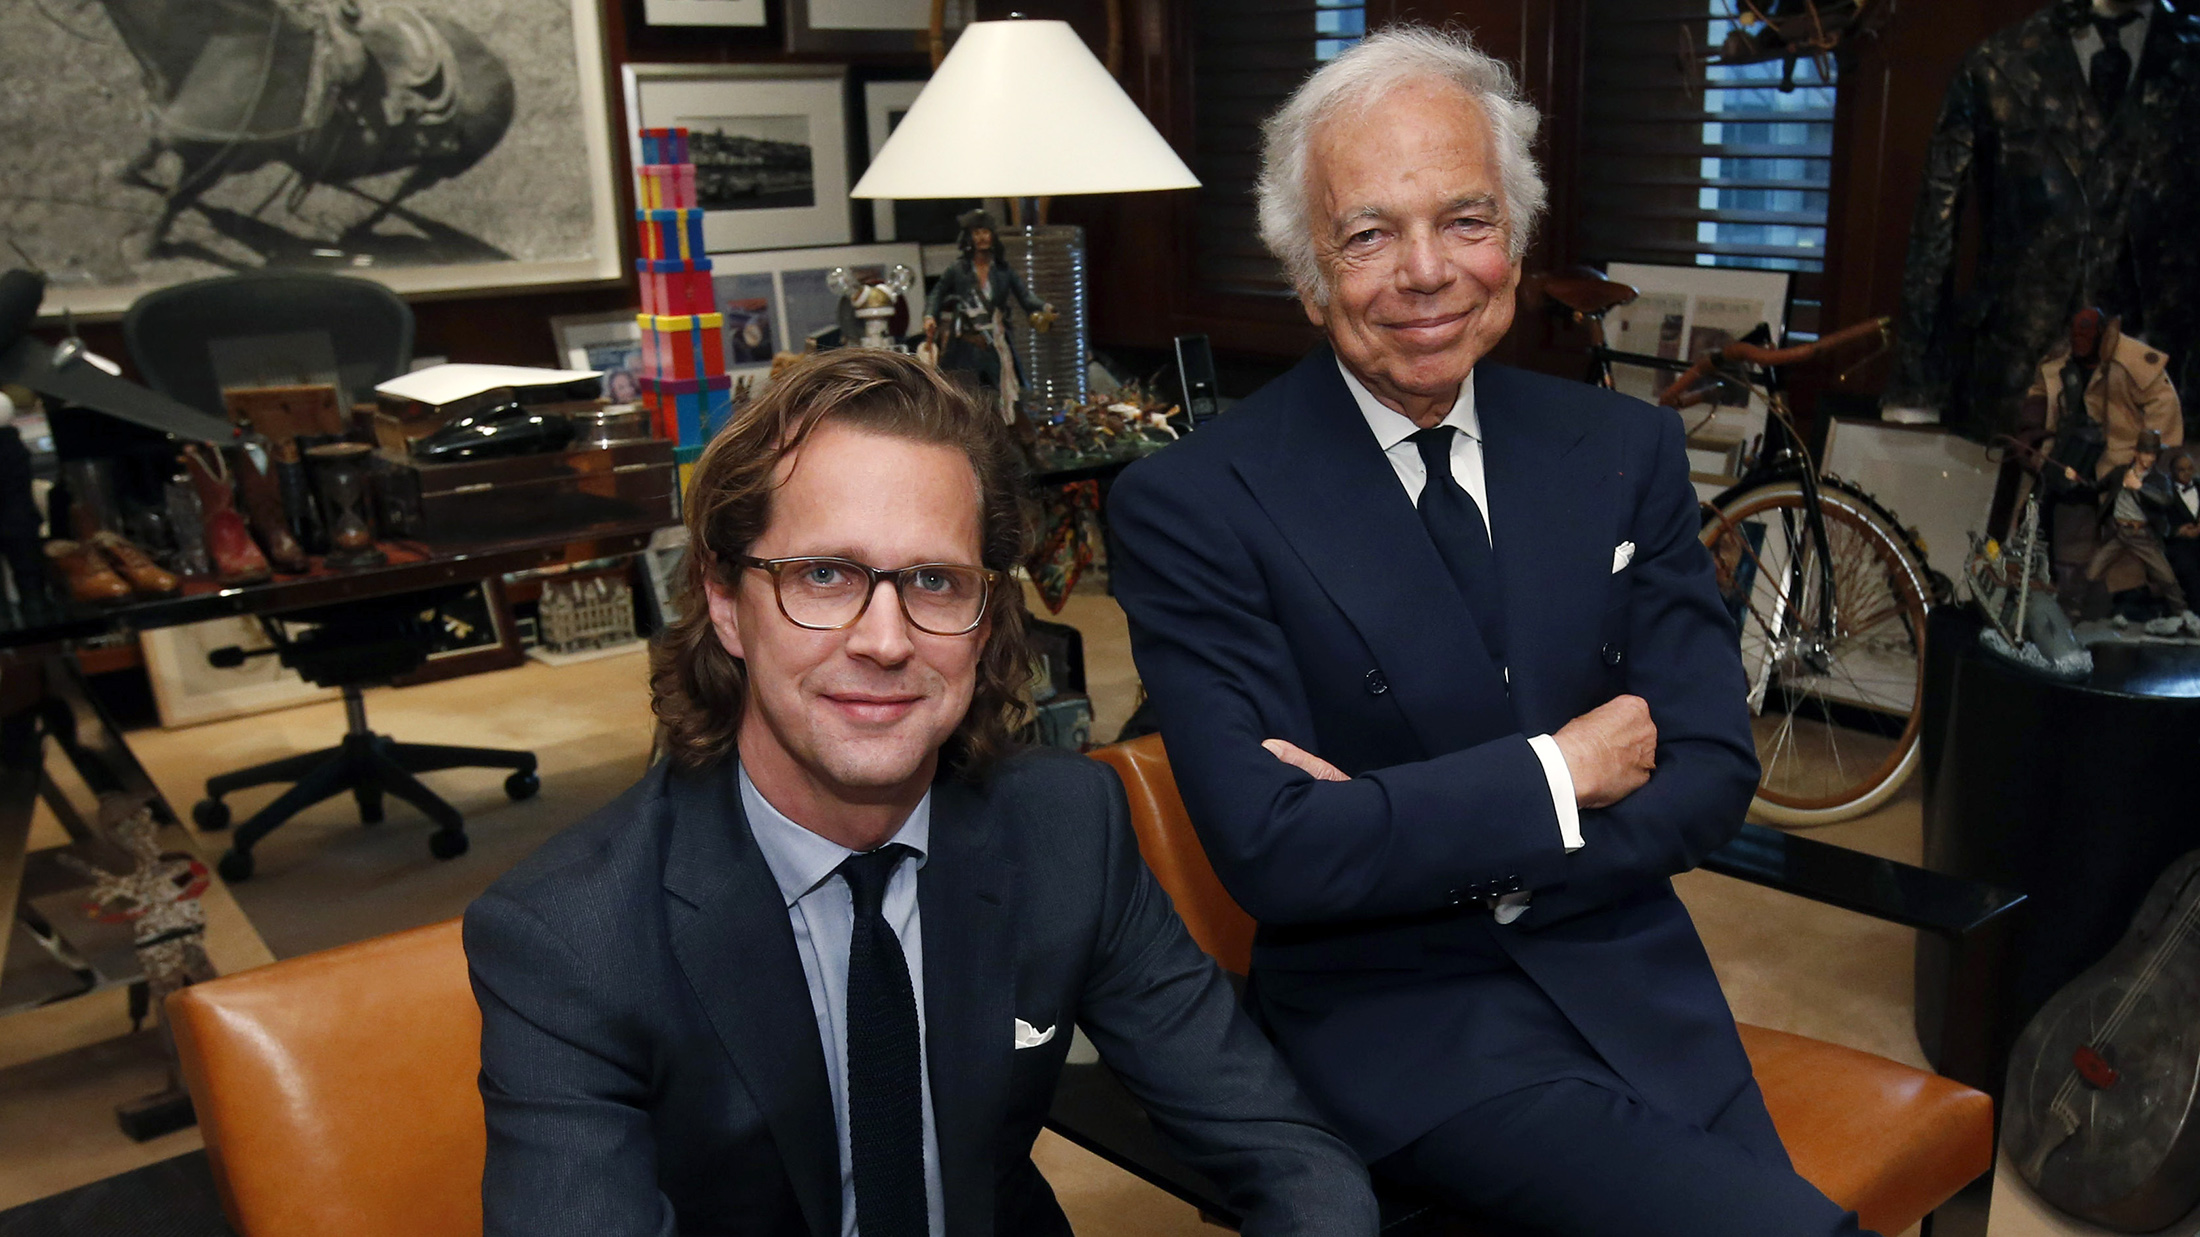 Ralph Lauren to Step Down as CEO, Hand Reins to Gap's Larsson - Bloomberg